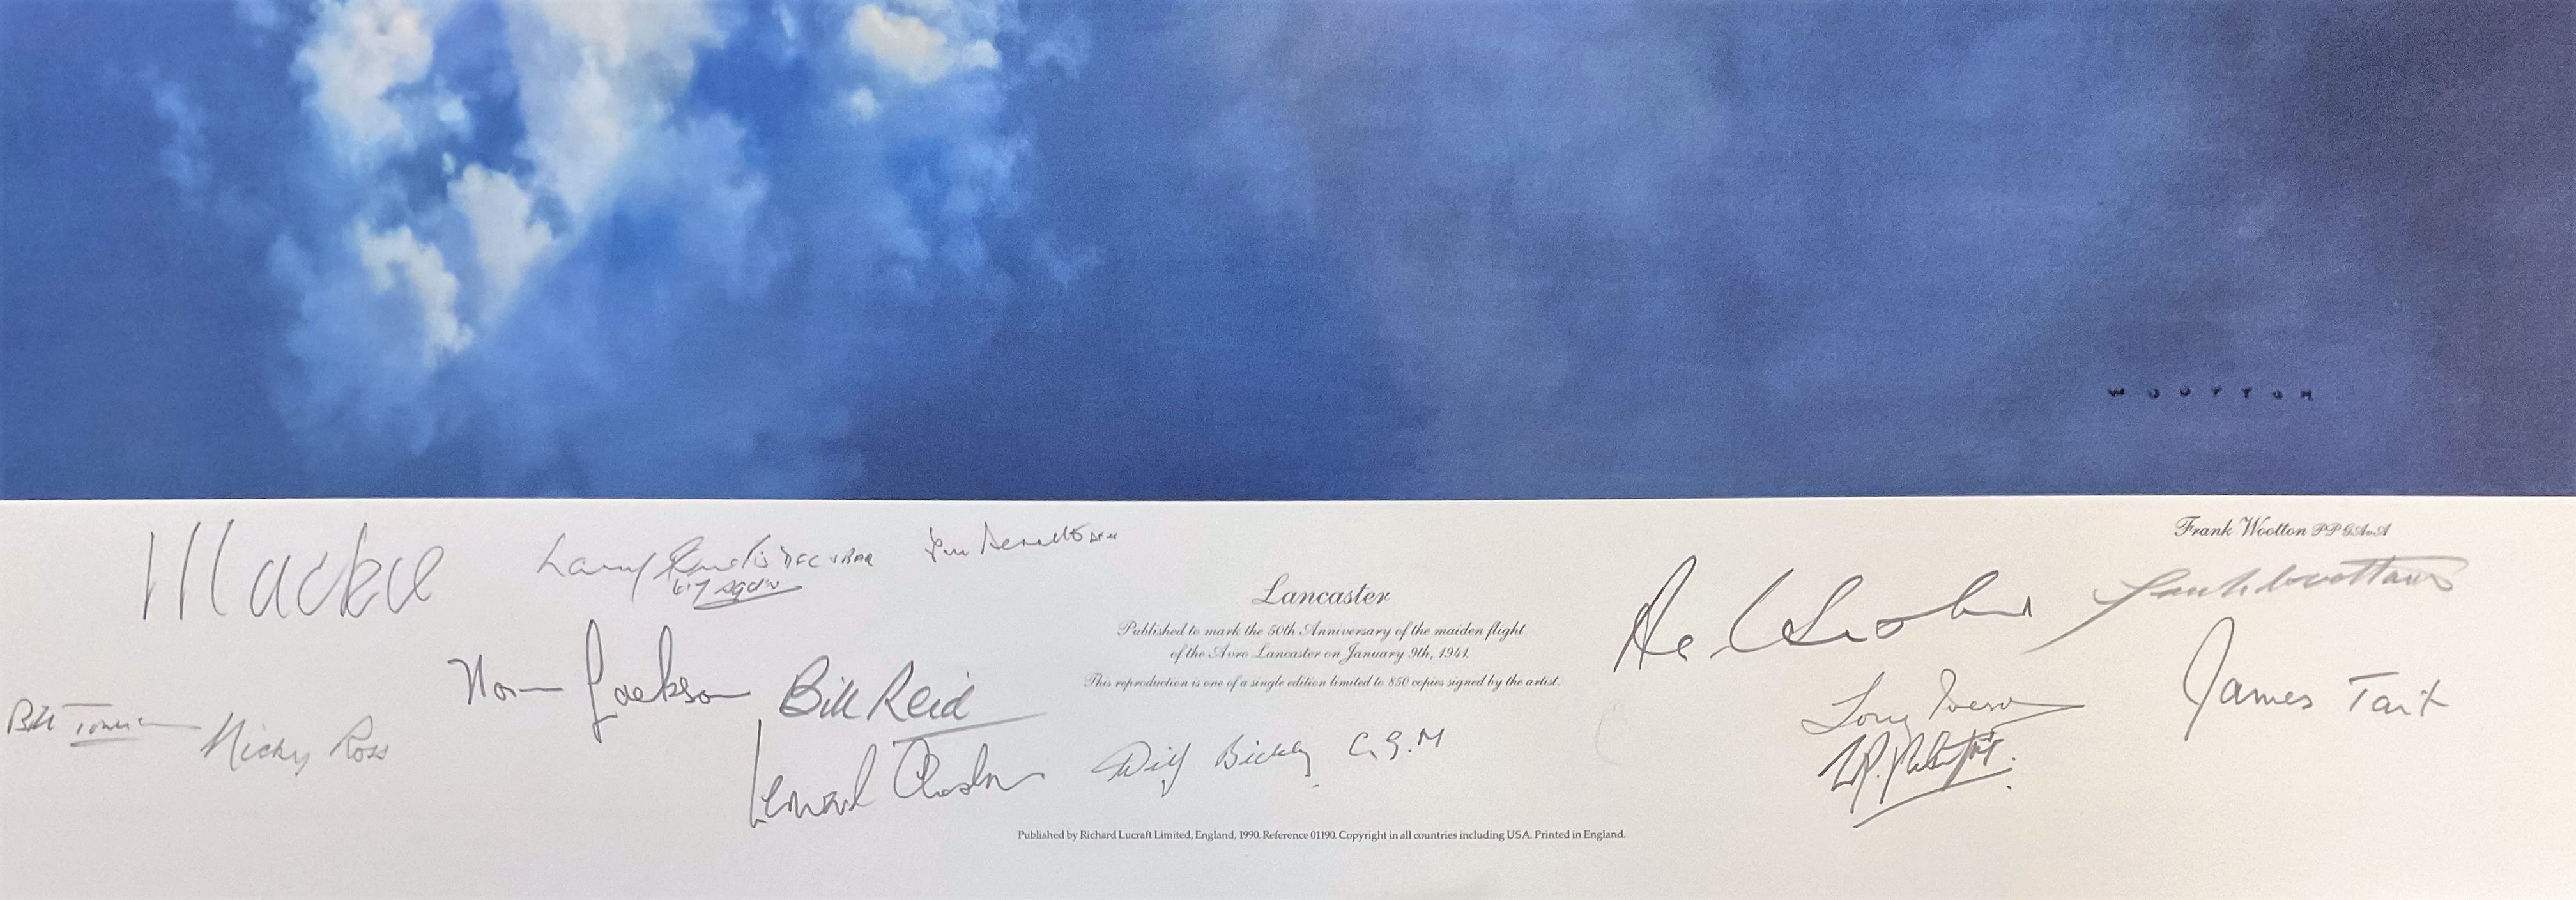 Frank Wootton Multi Signed Colour 30x22 Limited Edition 359/850 Print Titled 'Lancaster'. Signed - Image 2 of 2